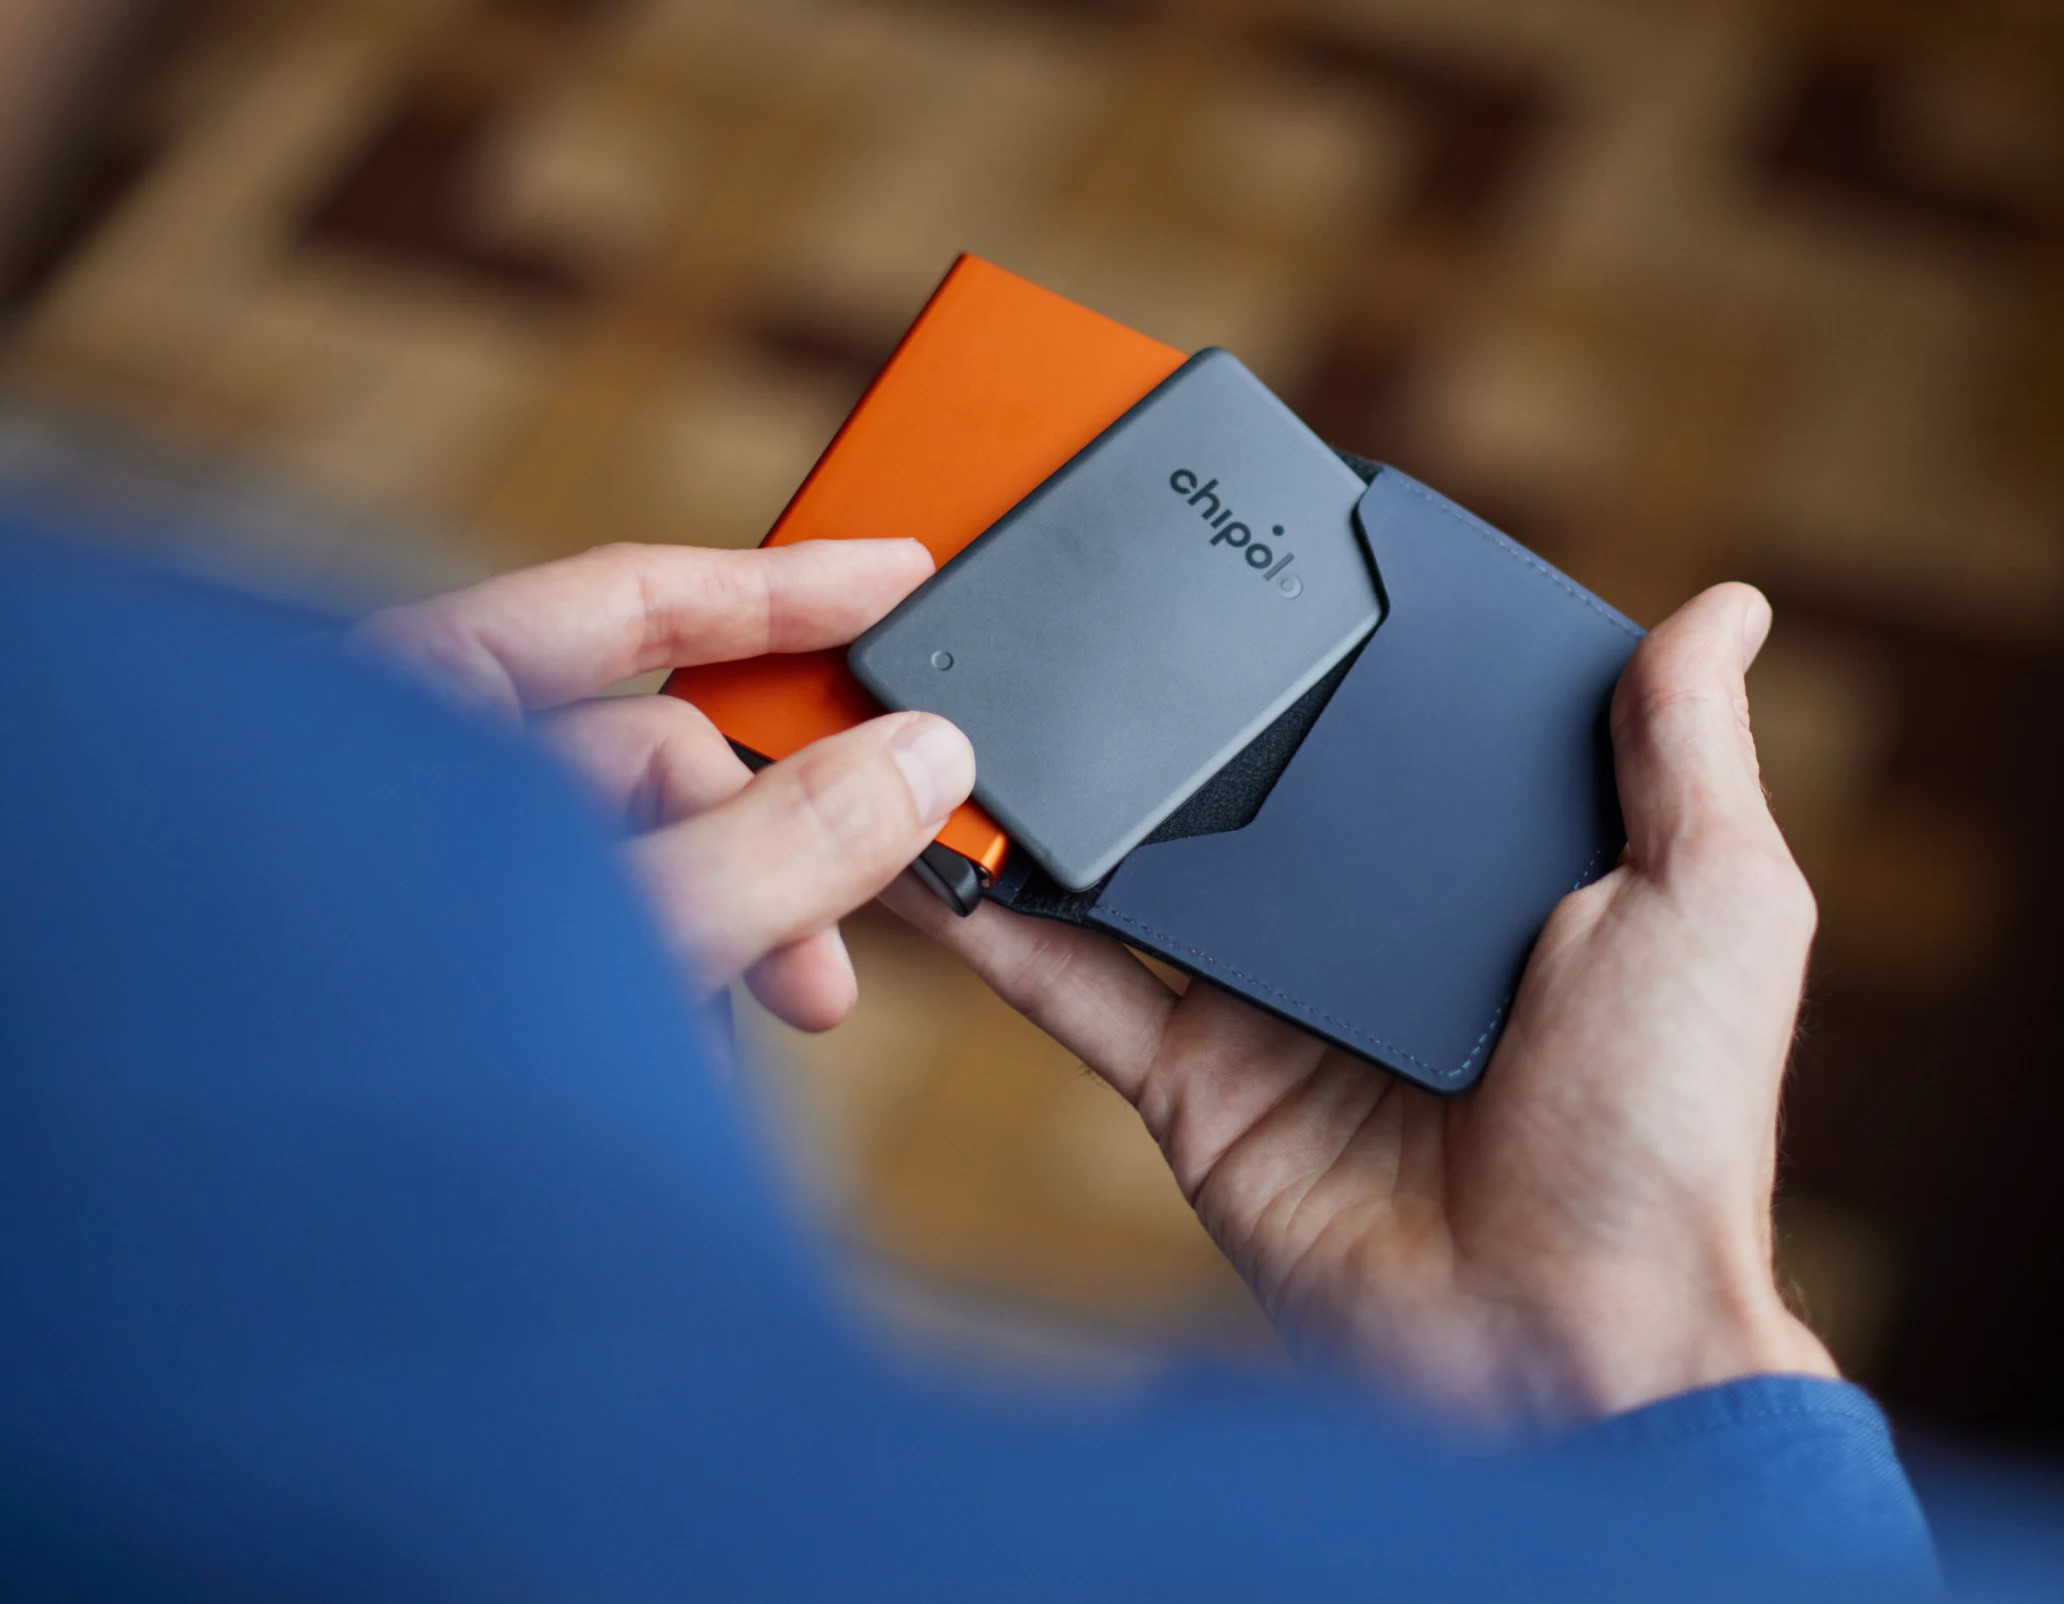 Wallet Tracker Review: Find the Best Device for Keeping Your Valuables Safe